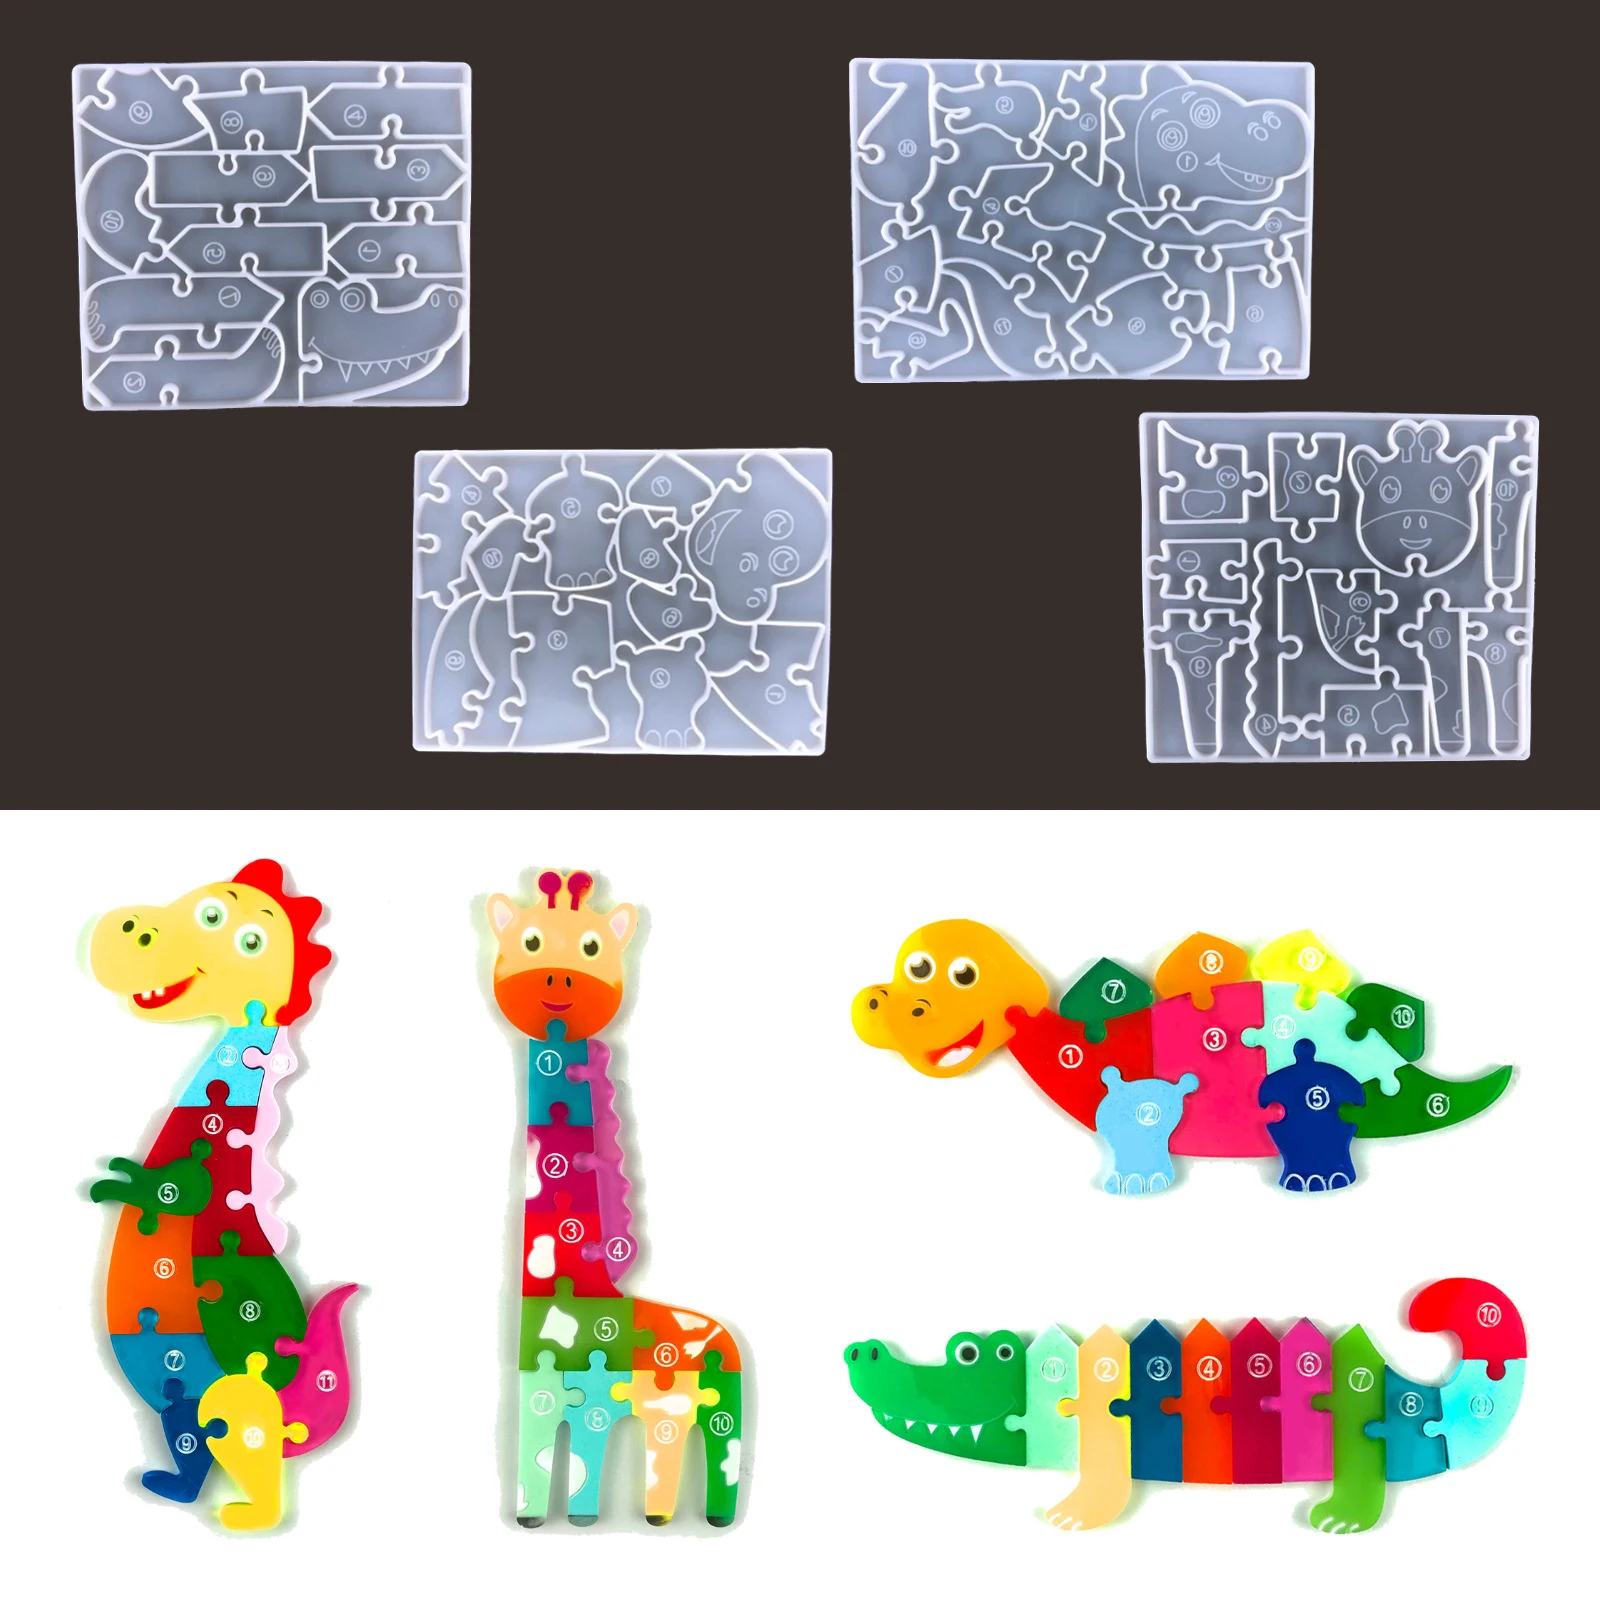 Dinosaur Puzzle Resin Mold DIY Giraffe Crocodile Puzzle Game Children Jigsaw Silicone Mold Toddler Kids Spelling Tools